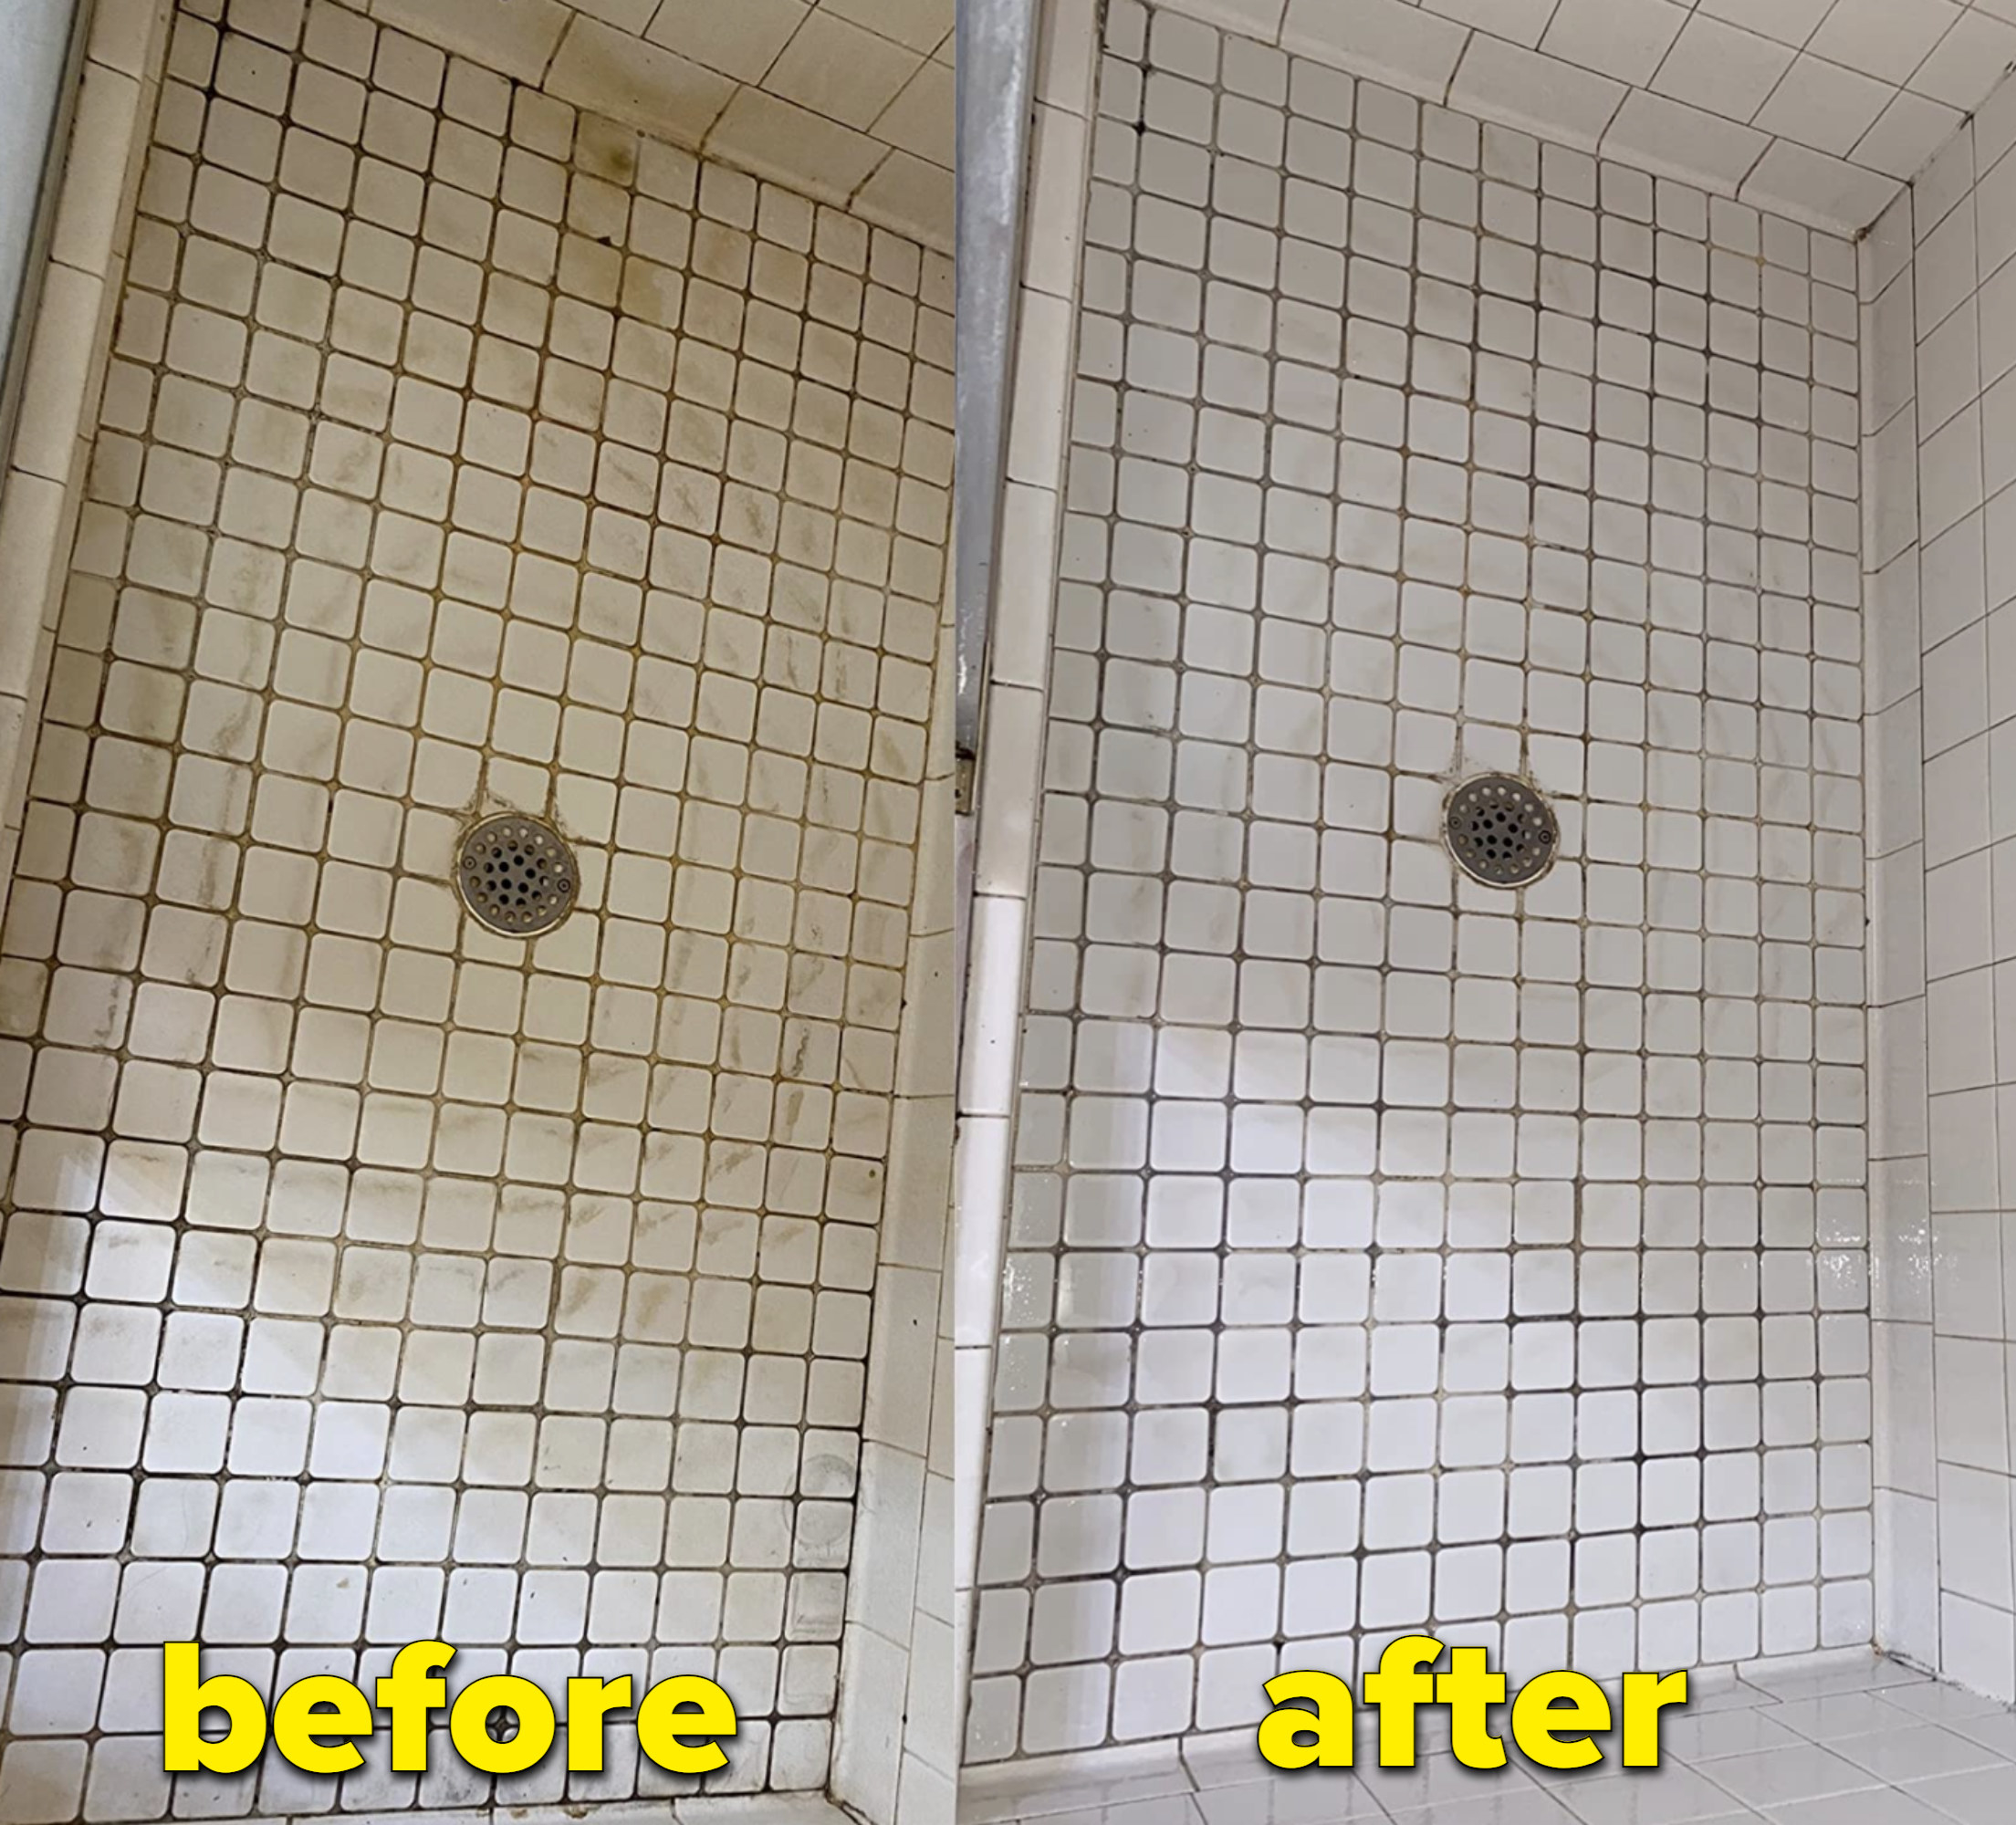 on the left a reviewer&#x27;s shower tile looking dirty and on the right the same tile floor looking cleaner after using the product